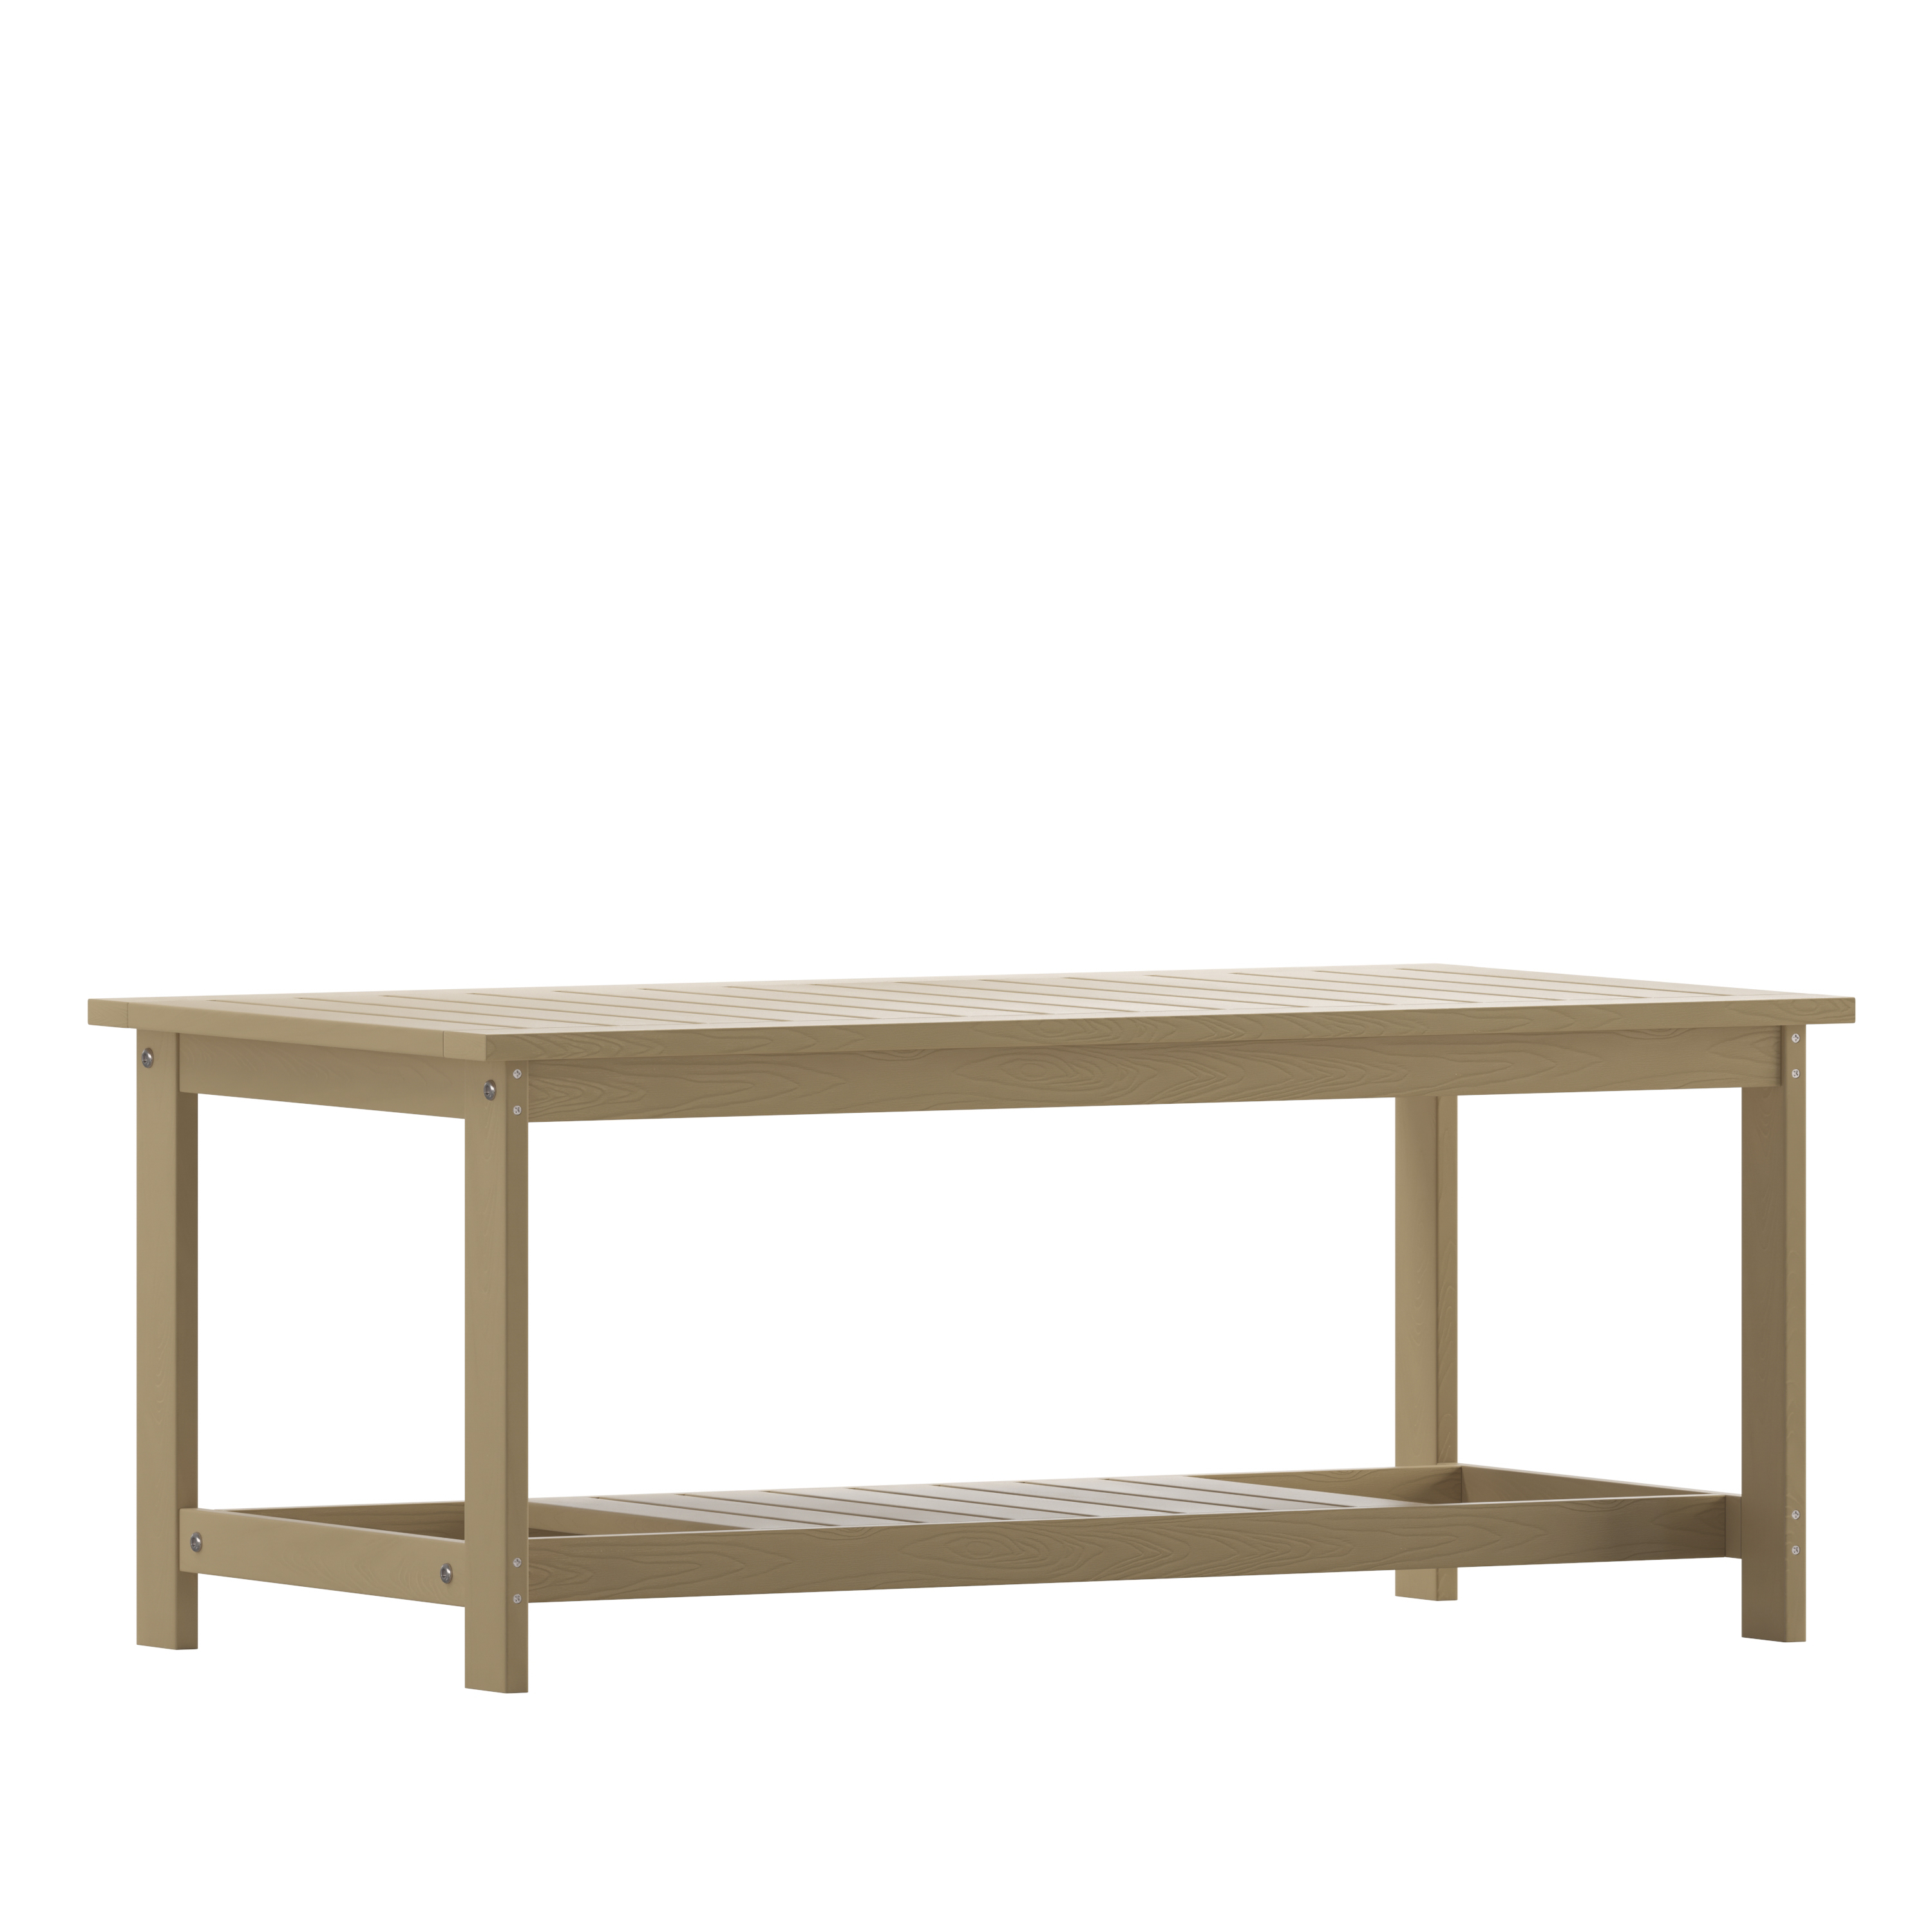 Flash Furniture JJ-T14022-BR-GG Natural All-Weather Poly Resin Wood Two Tiered Adirondack Slatted Coffee Table